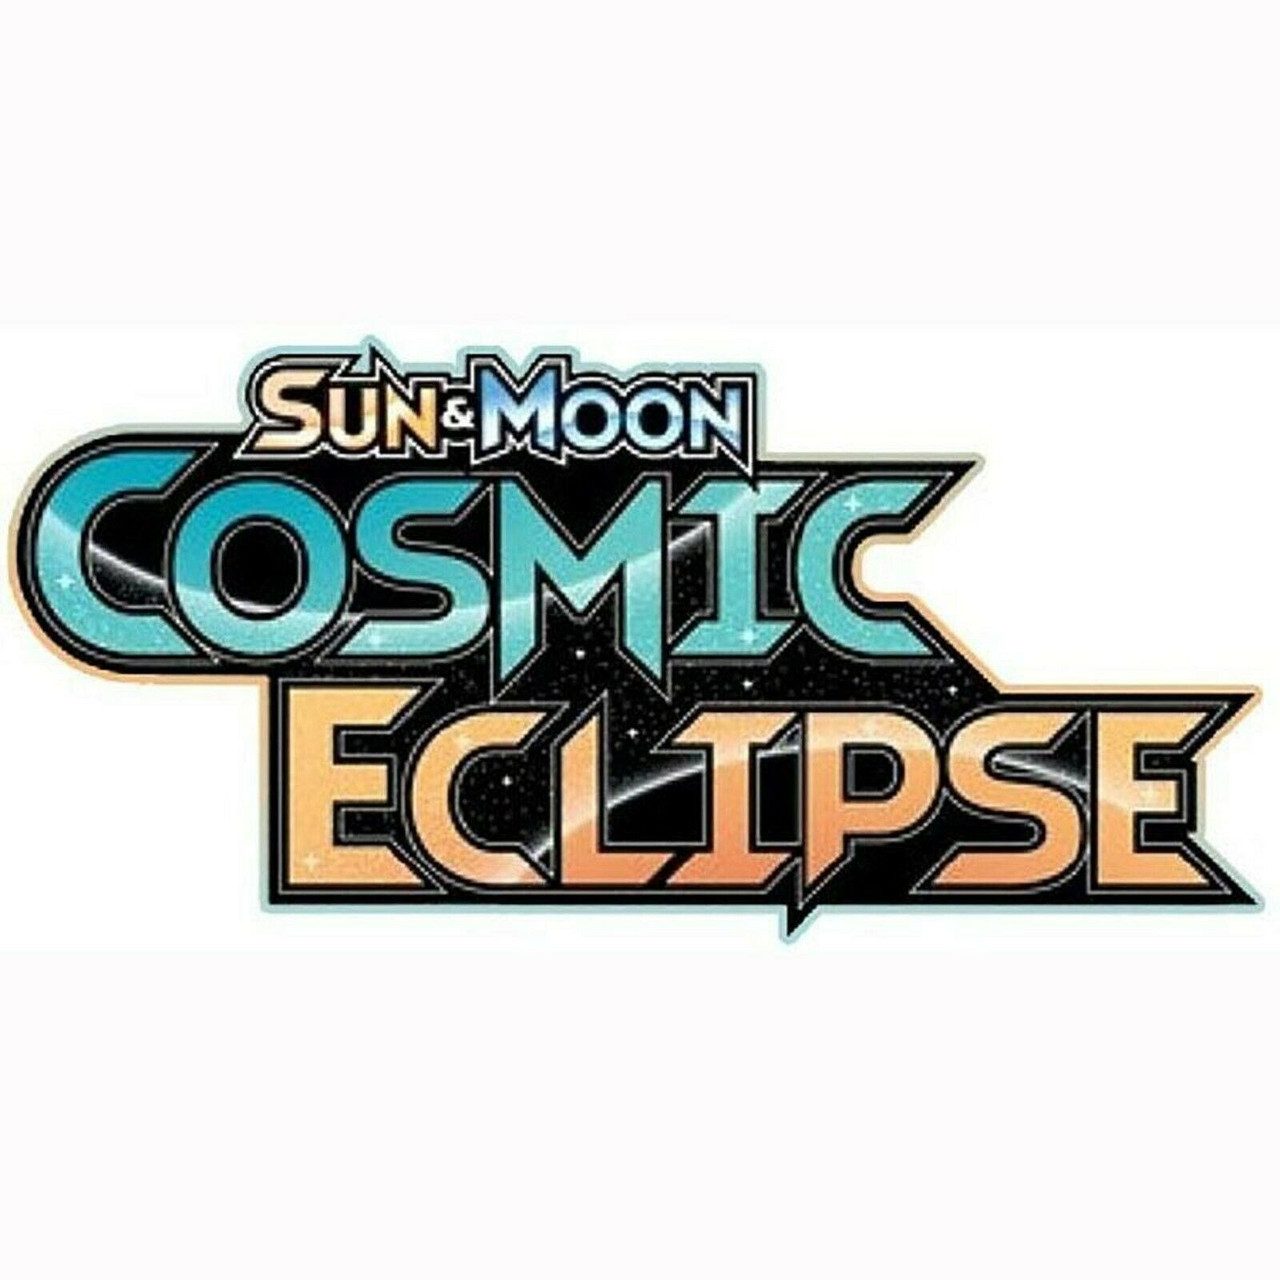 Pokemon TCG: Cosmic Eclipse Booster Pack